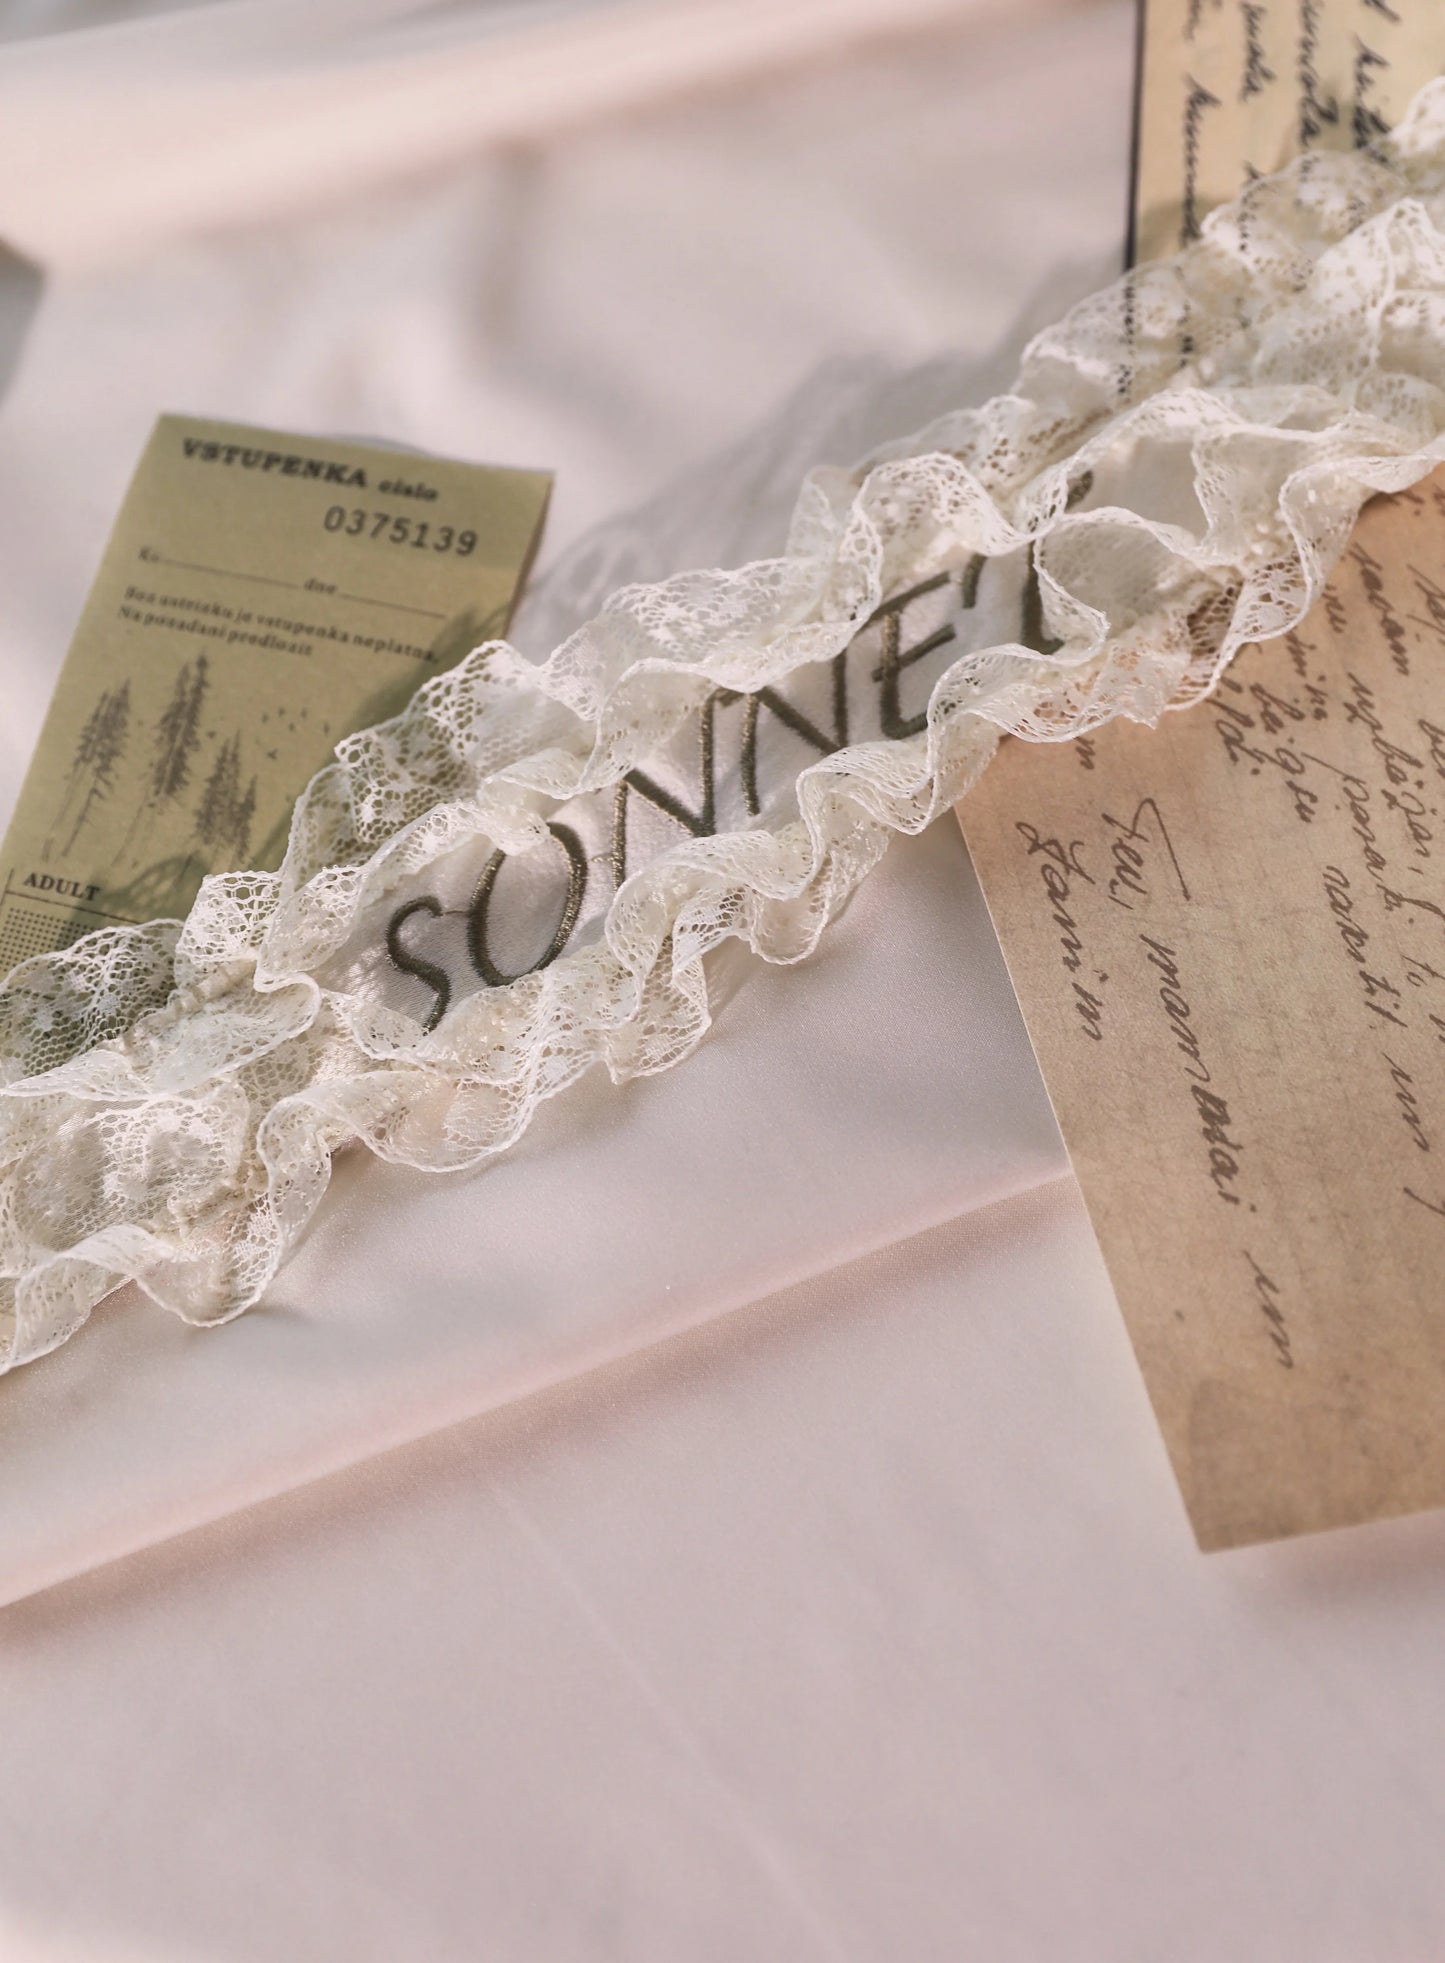 Simultaneous purchase only [Reservations until 5/16] Fourteen-line poems Head dresses, hats, cloth belts, corsages and other accessories